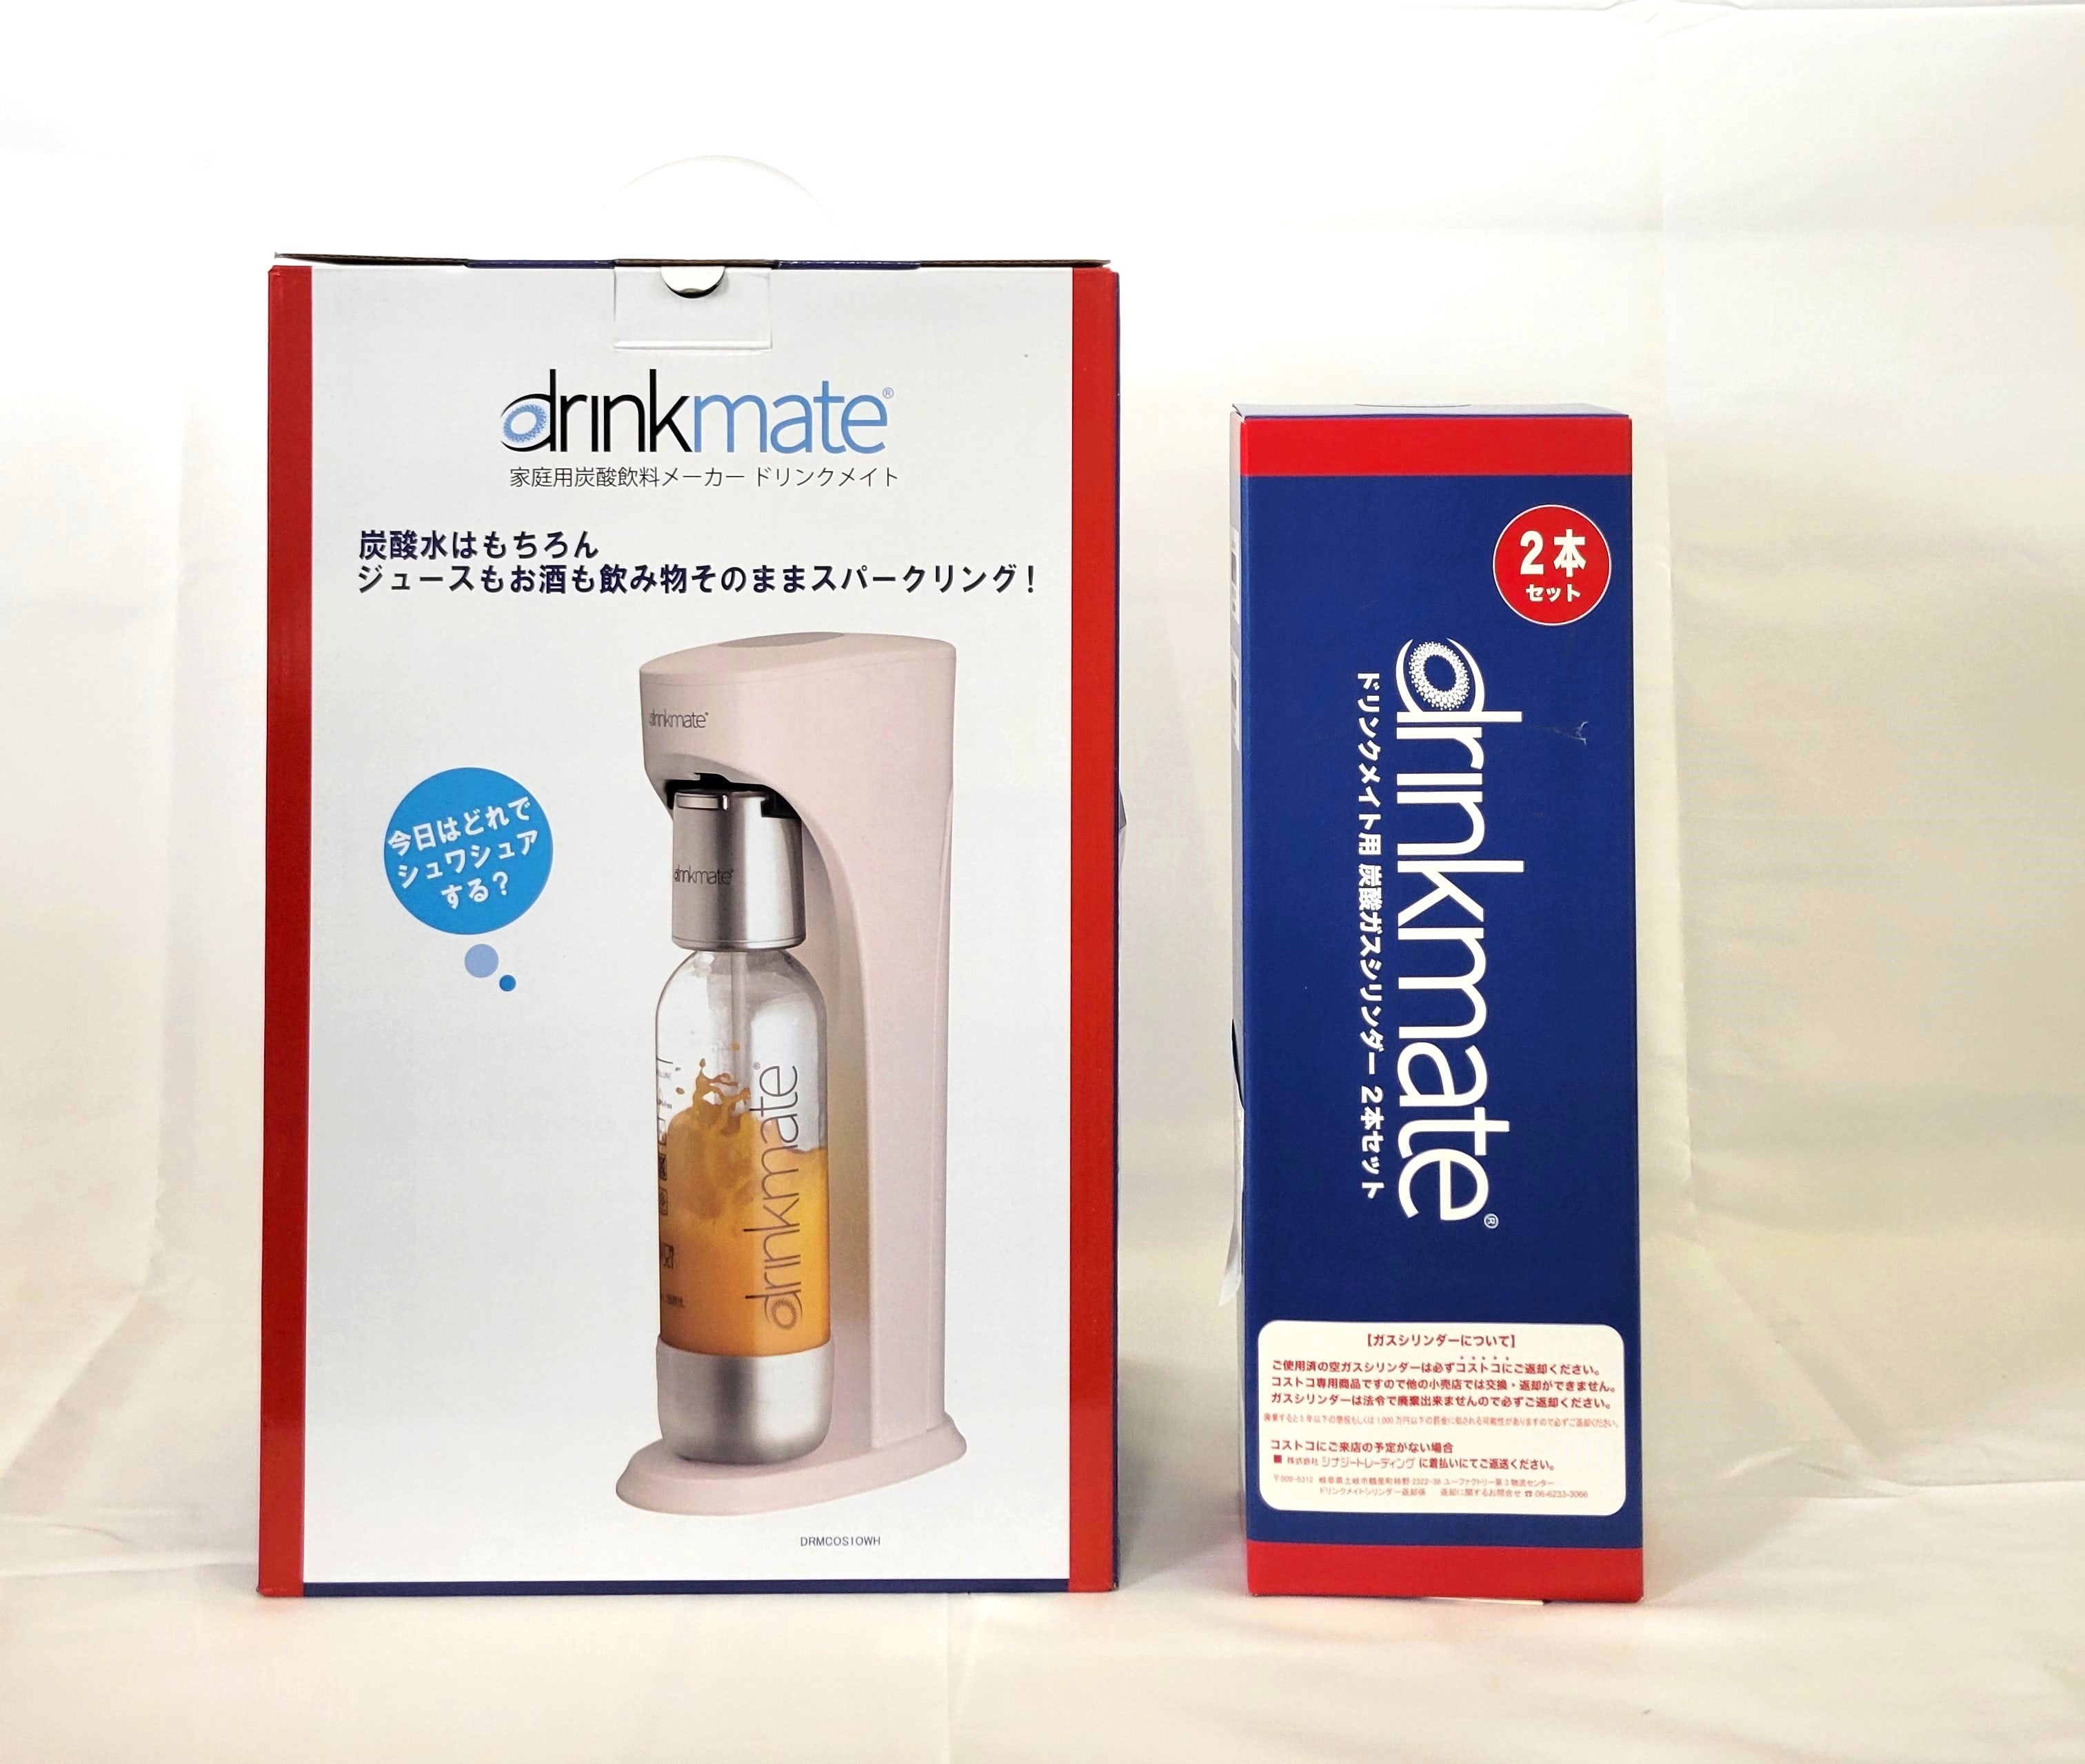 drinkmate ドリンクメイト　スターターキット　DRMCOS10WH調理家電